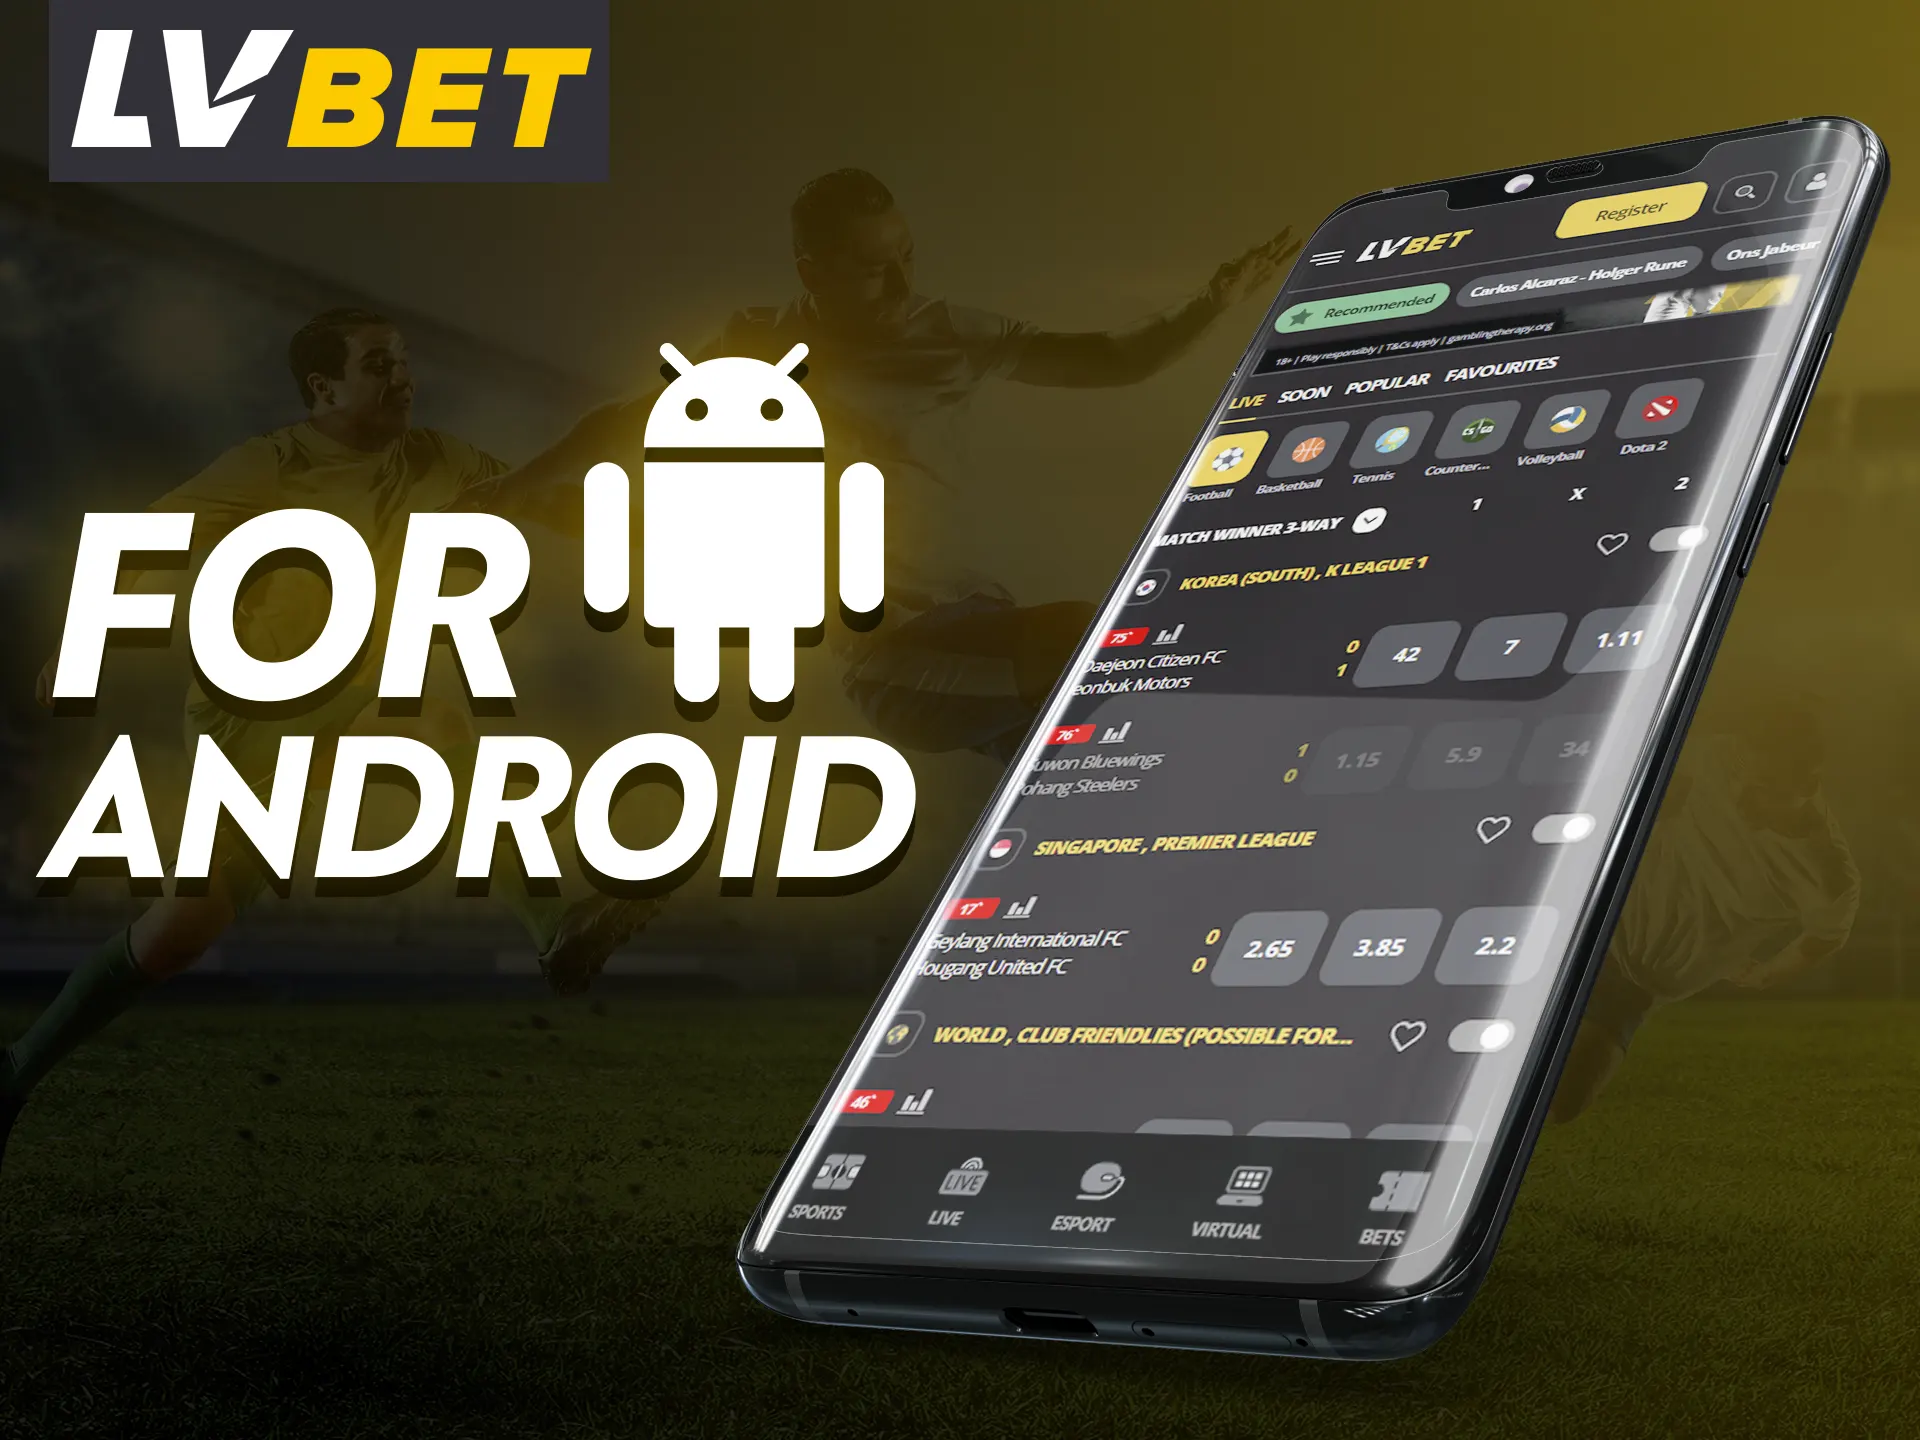 With LV Bet you can place bets directly from your Android device through the special app.